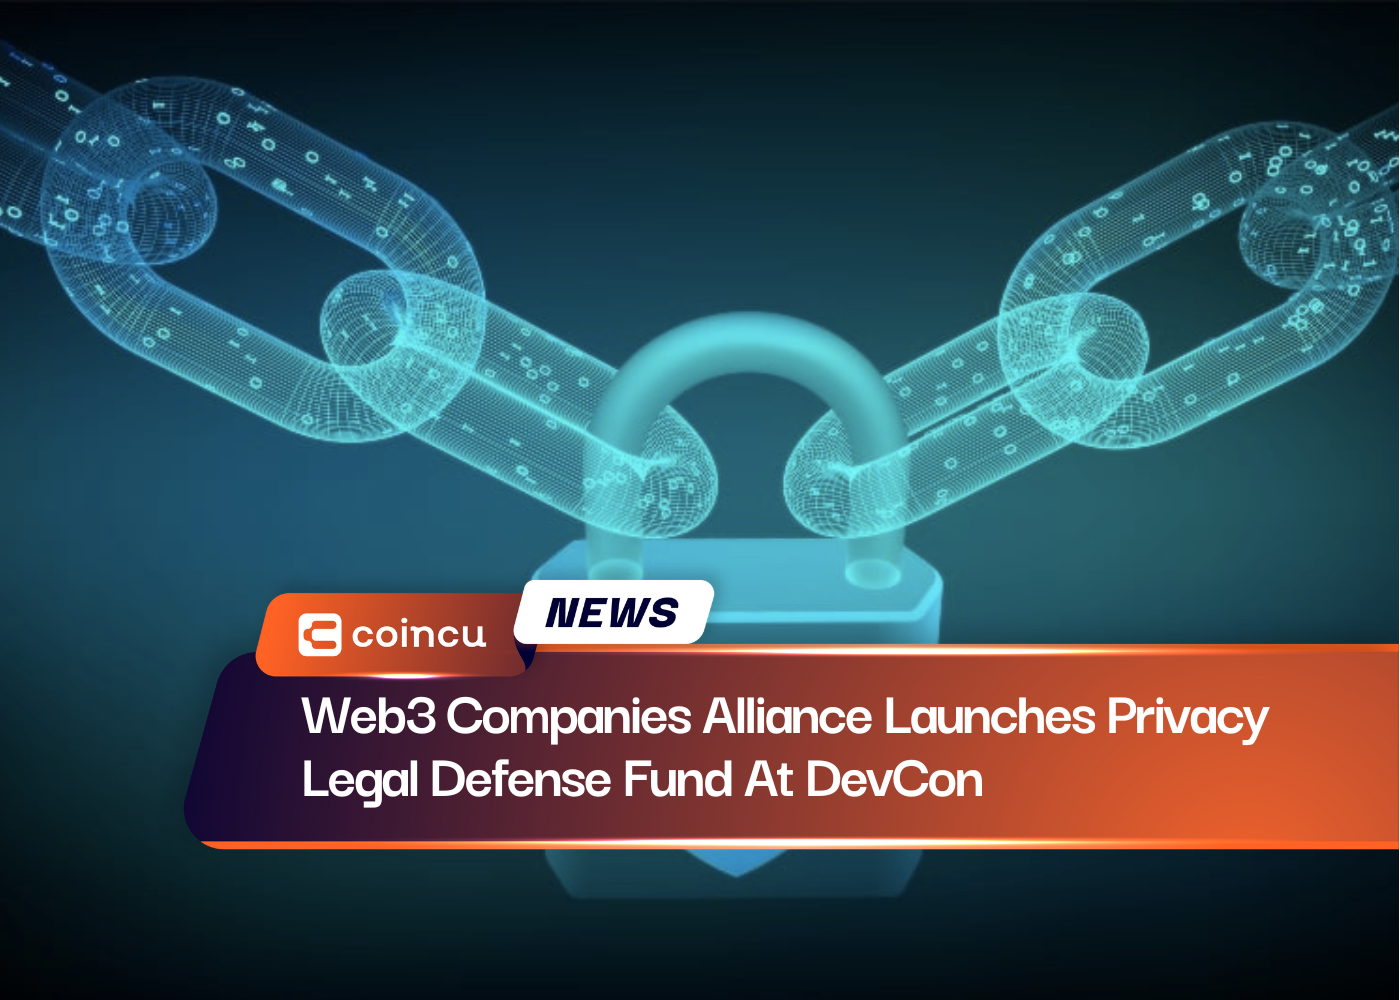 Web3 Companies Alliance Launches Privacy Legal Defense Fund At DevCon